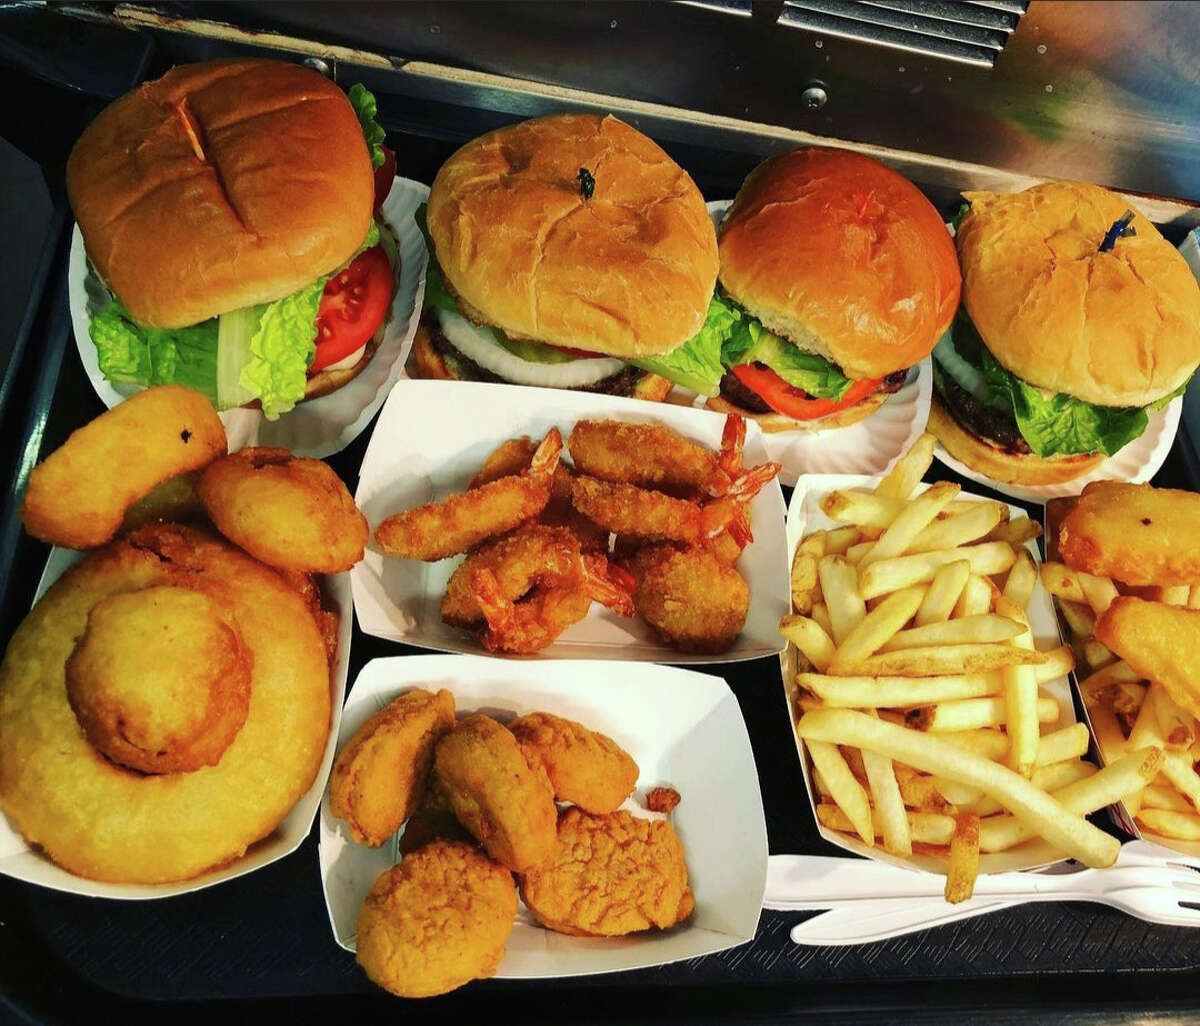 An overhead view of many types of road food in paper trays., including four types of burgers, onion rings, chucken nuggets, and french fries.